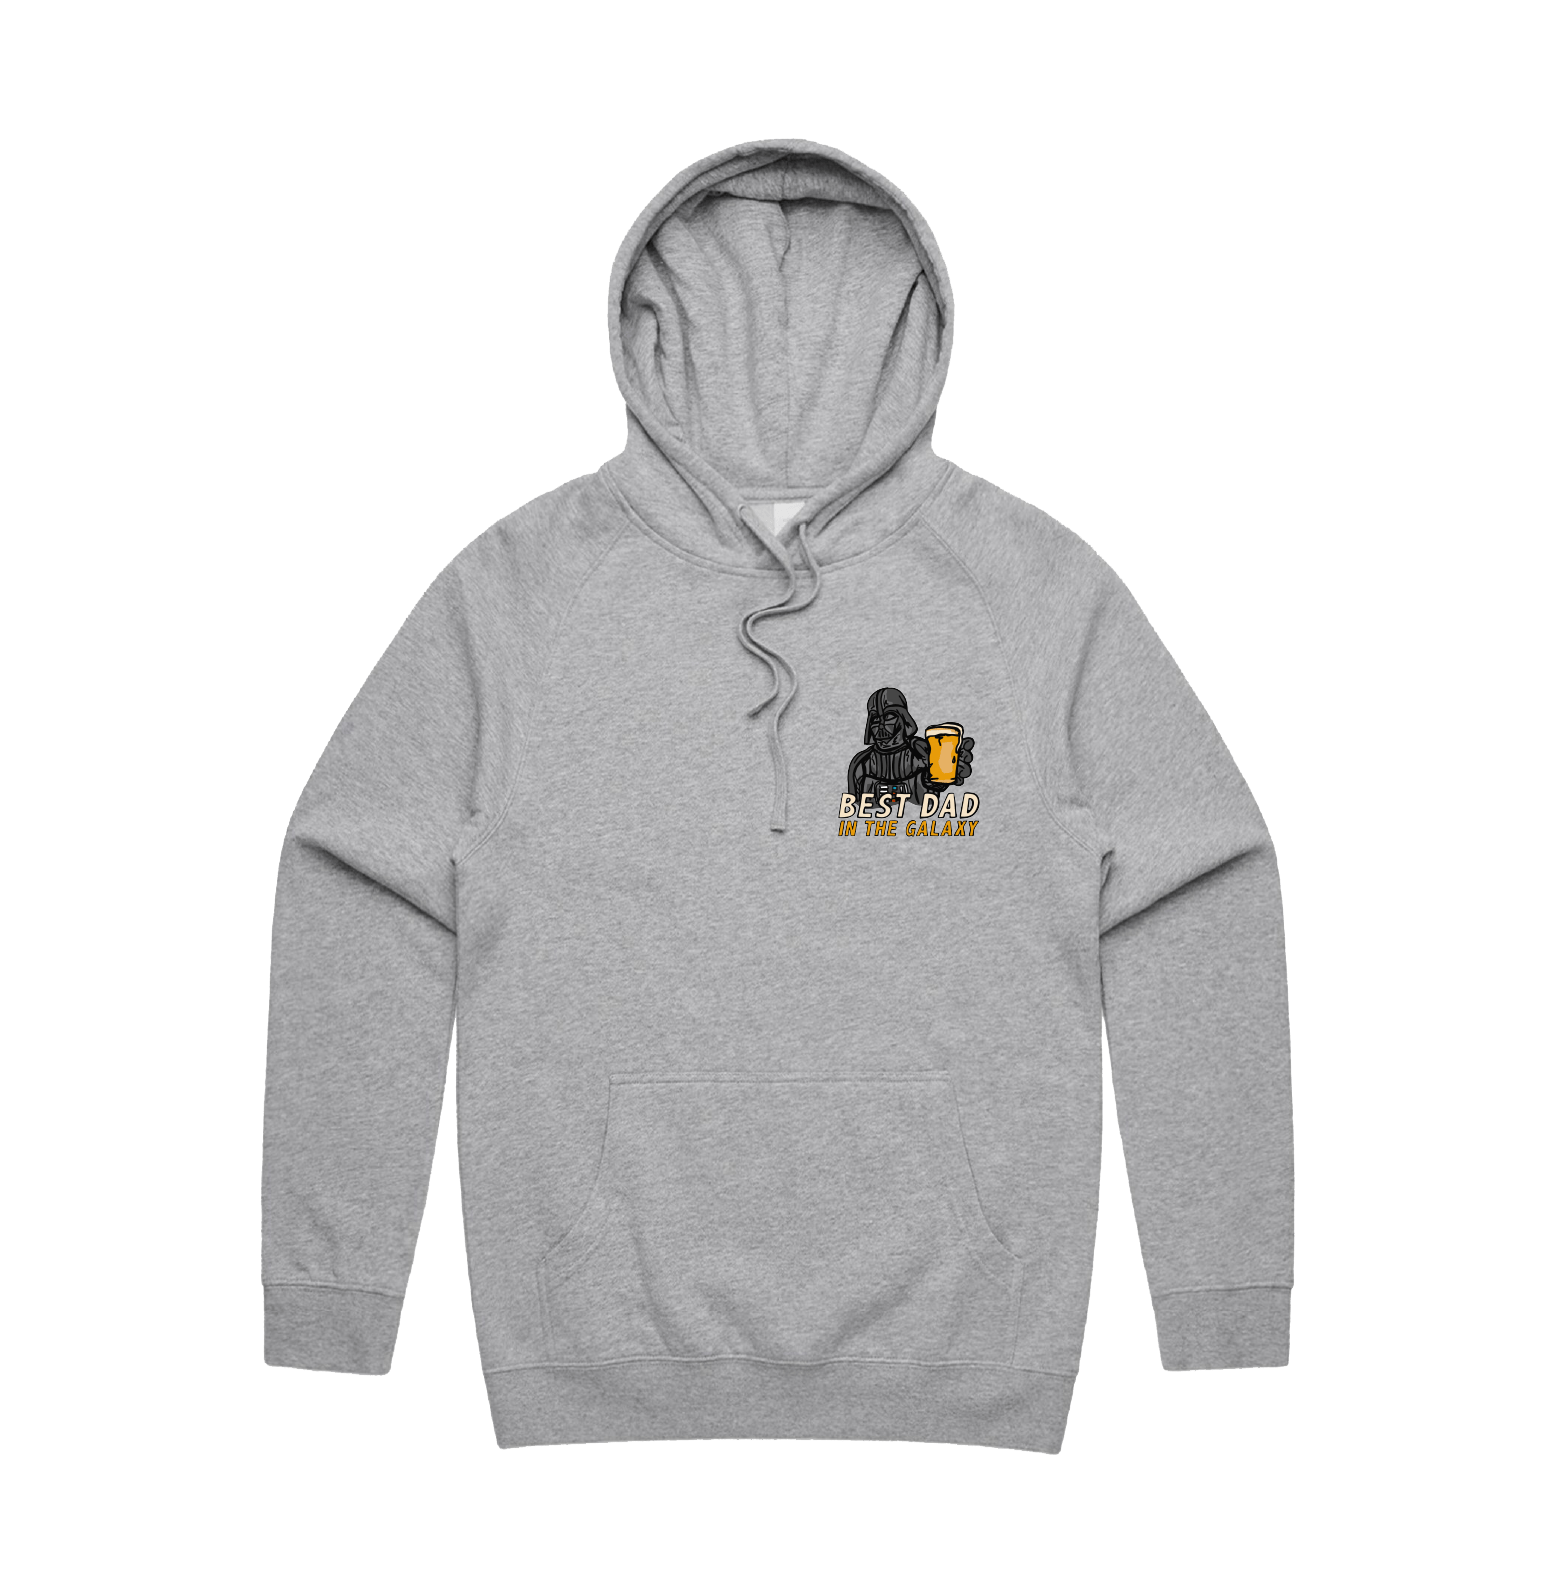 S / Grey / Small Front Design Best Dad in the Galaxy 🌌 - Unisex Hoodie